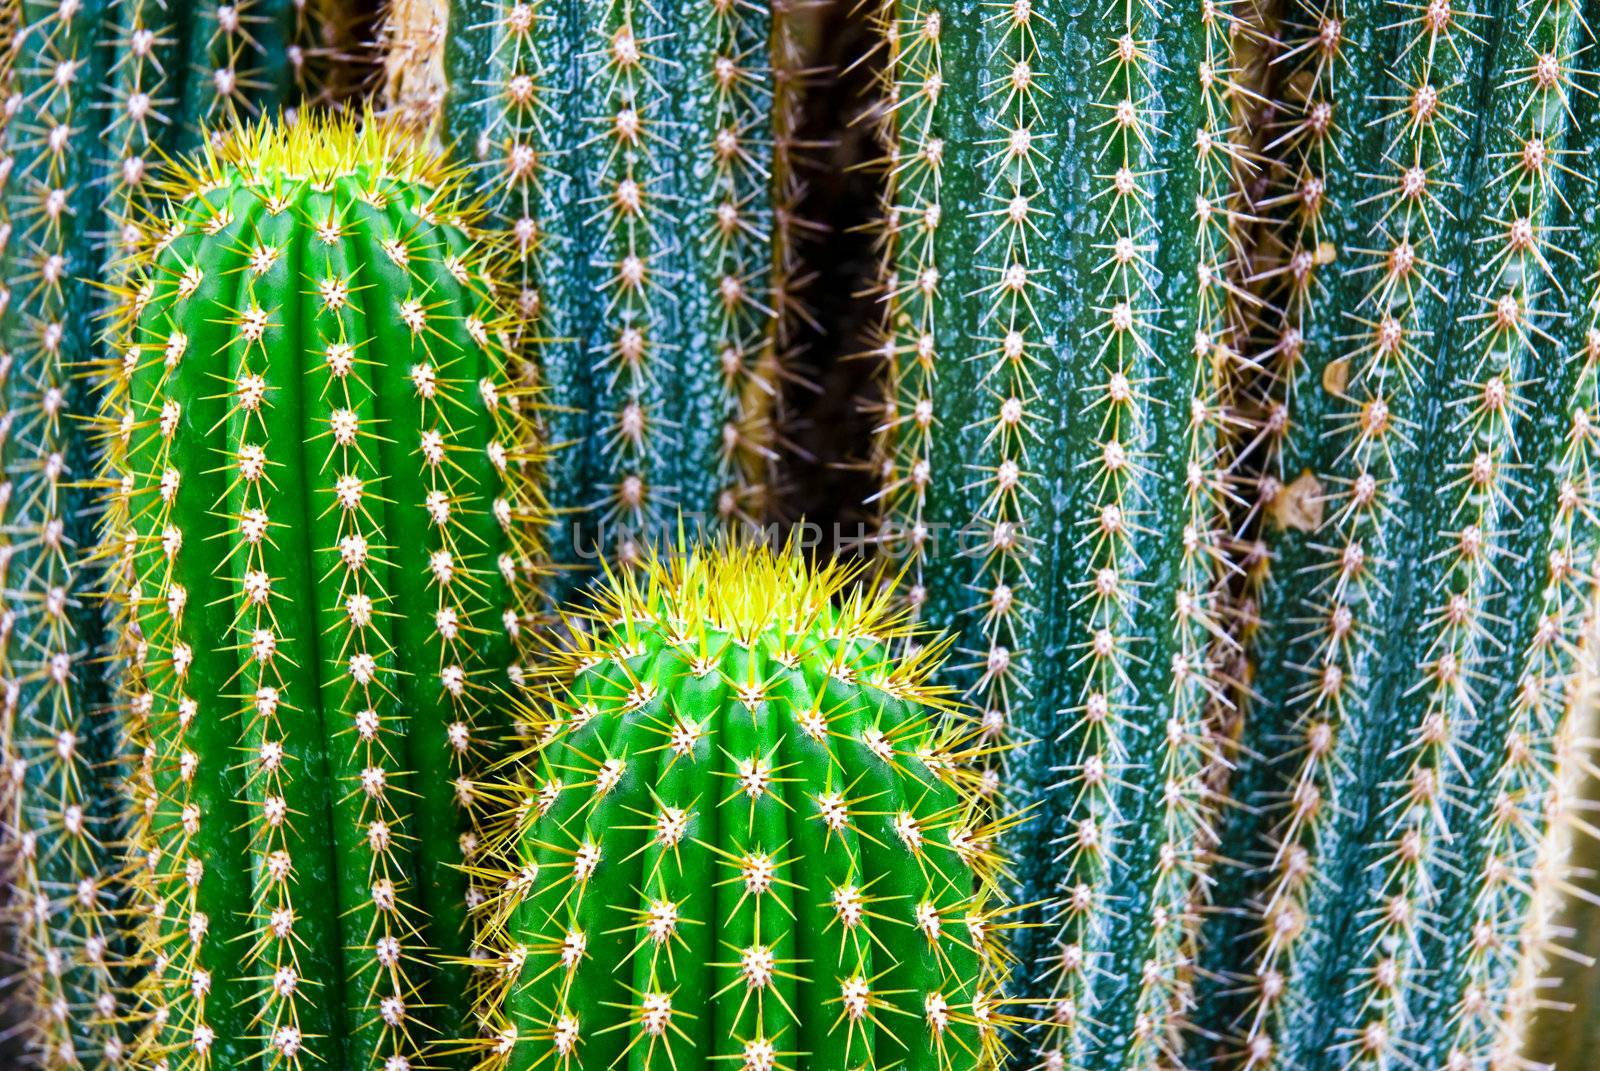 Tropical green cactus - cacti by mozzyb